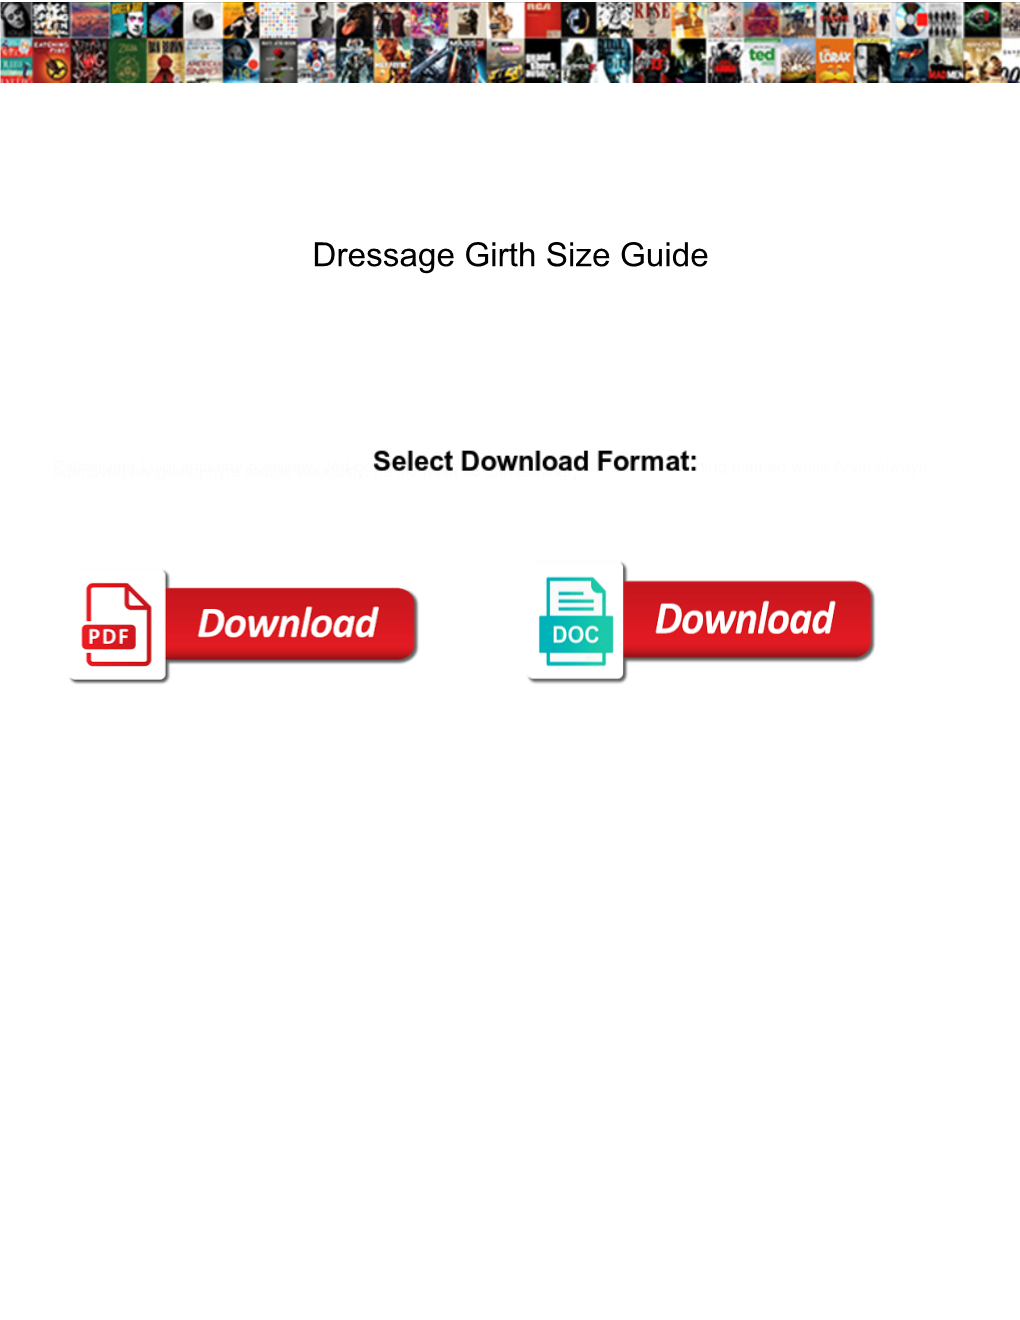 Dressage Girth Size Guide